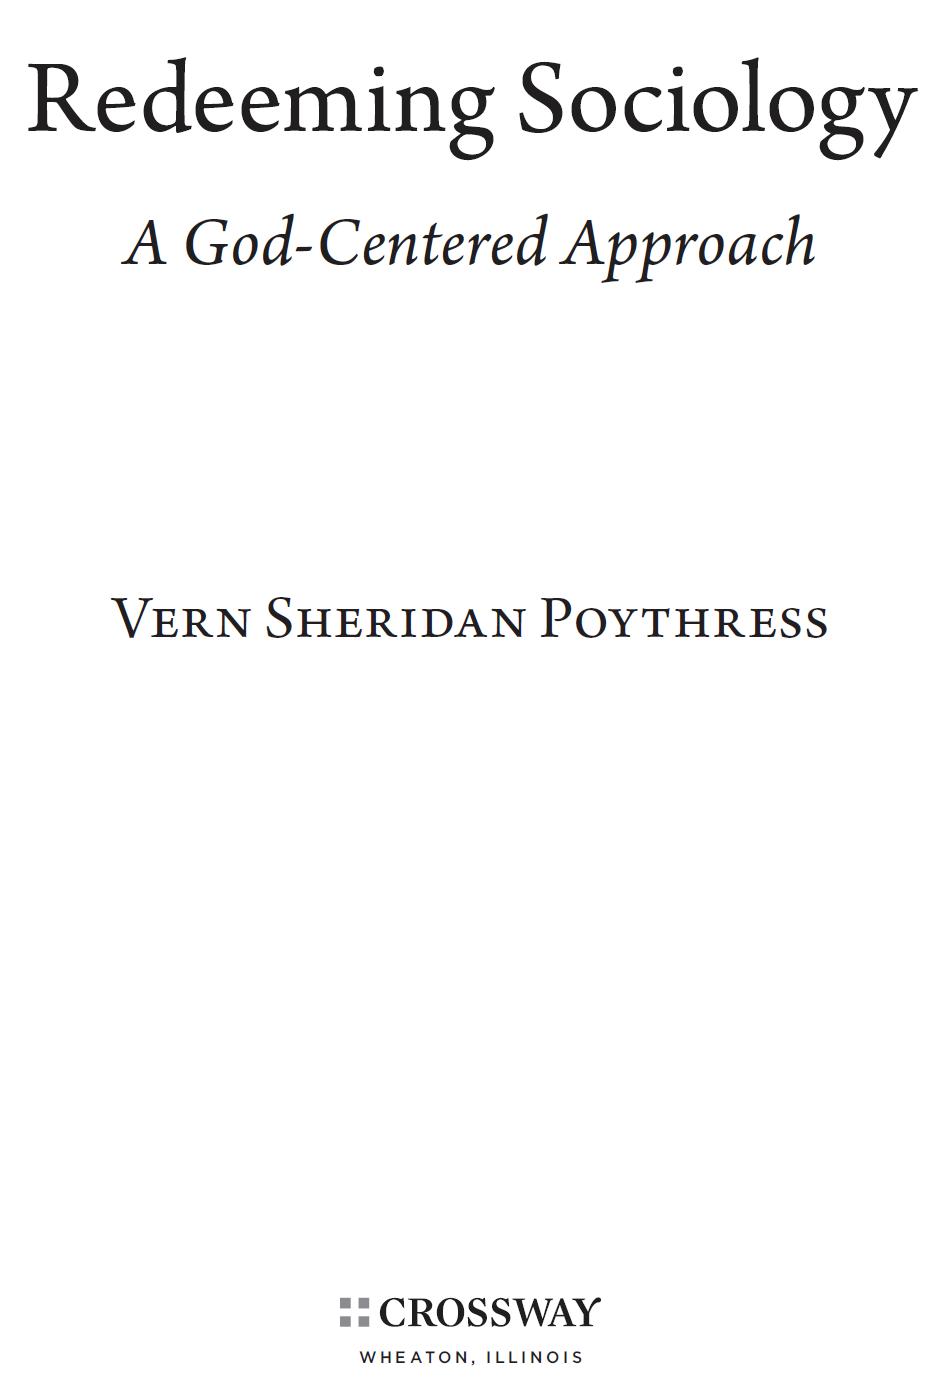 Redeeming Sociology A God-Centered Approach Copyright 2011 by Vern Sheridan - photo 2